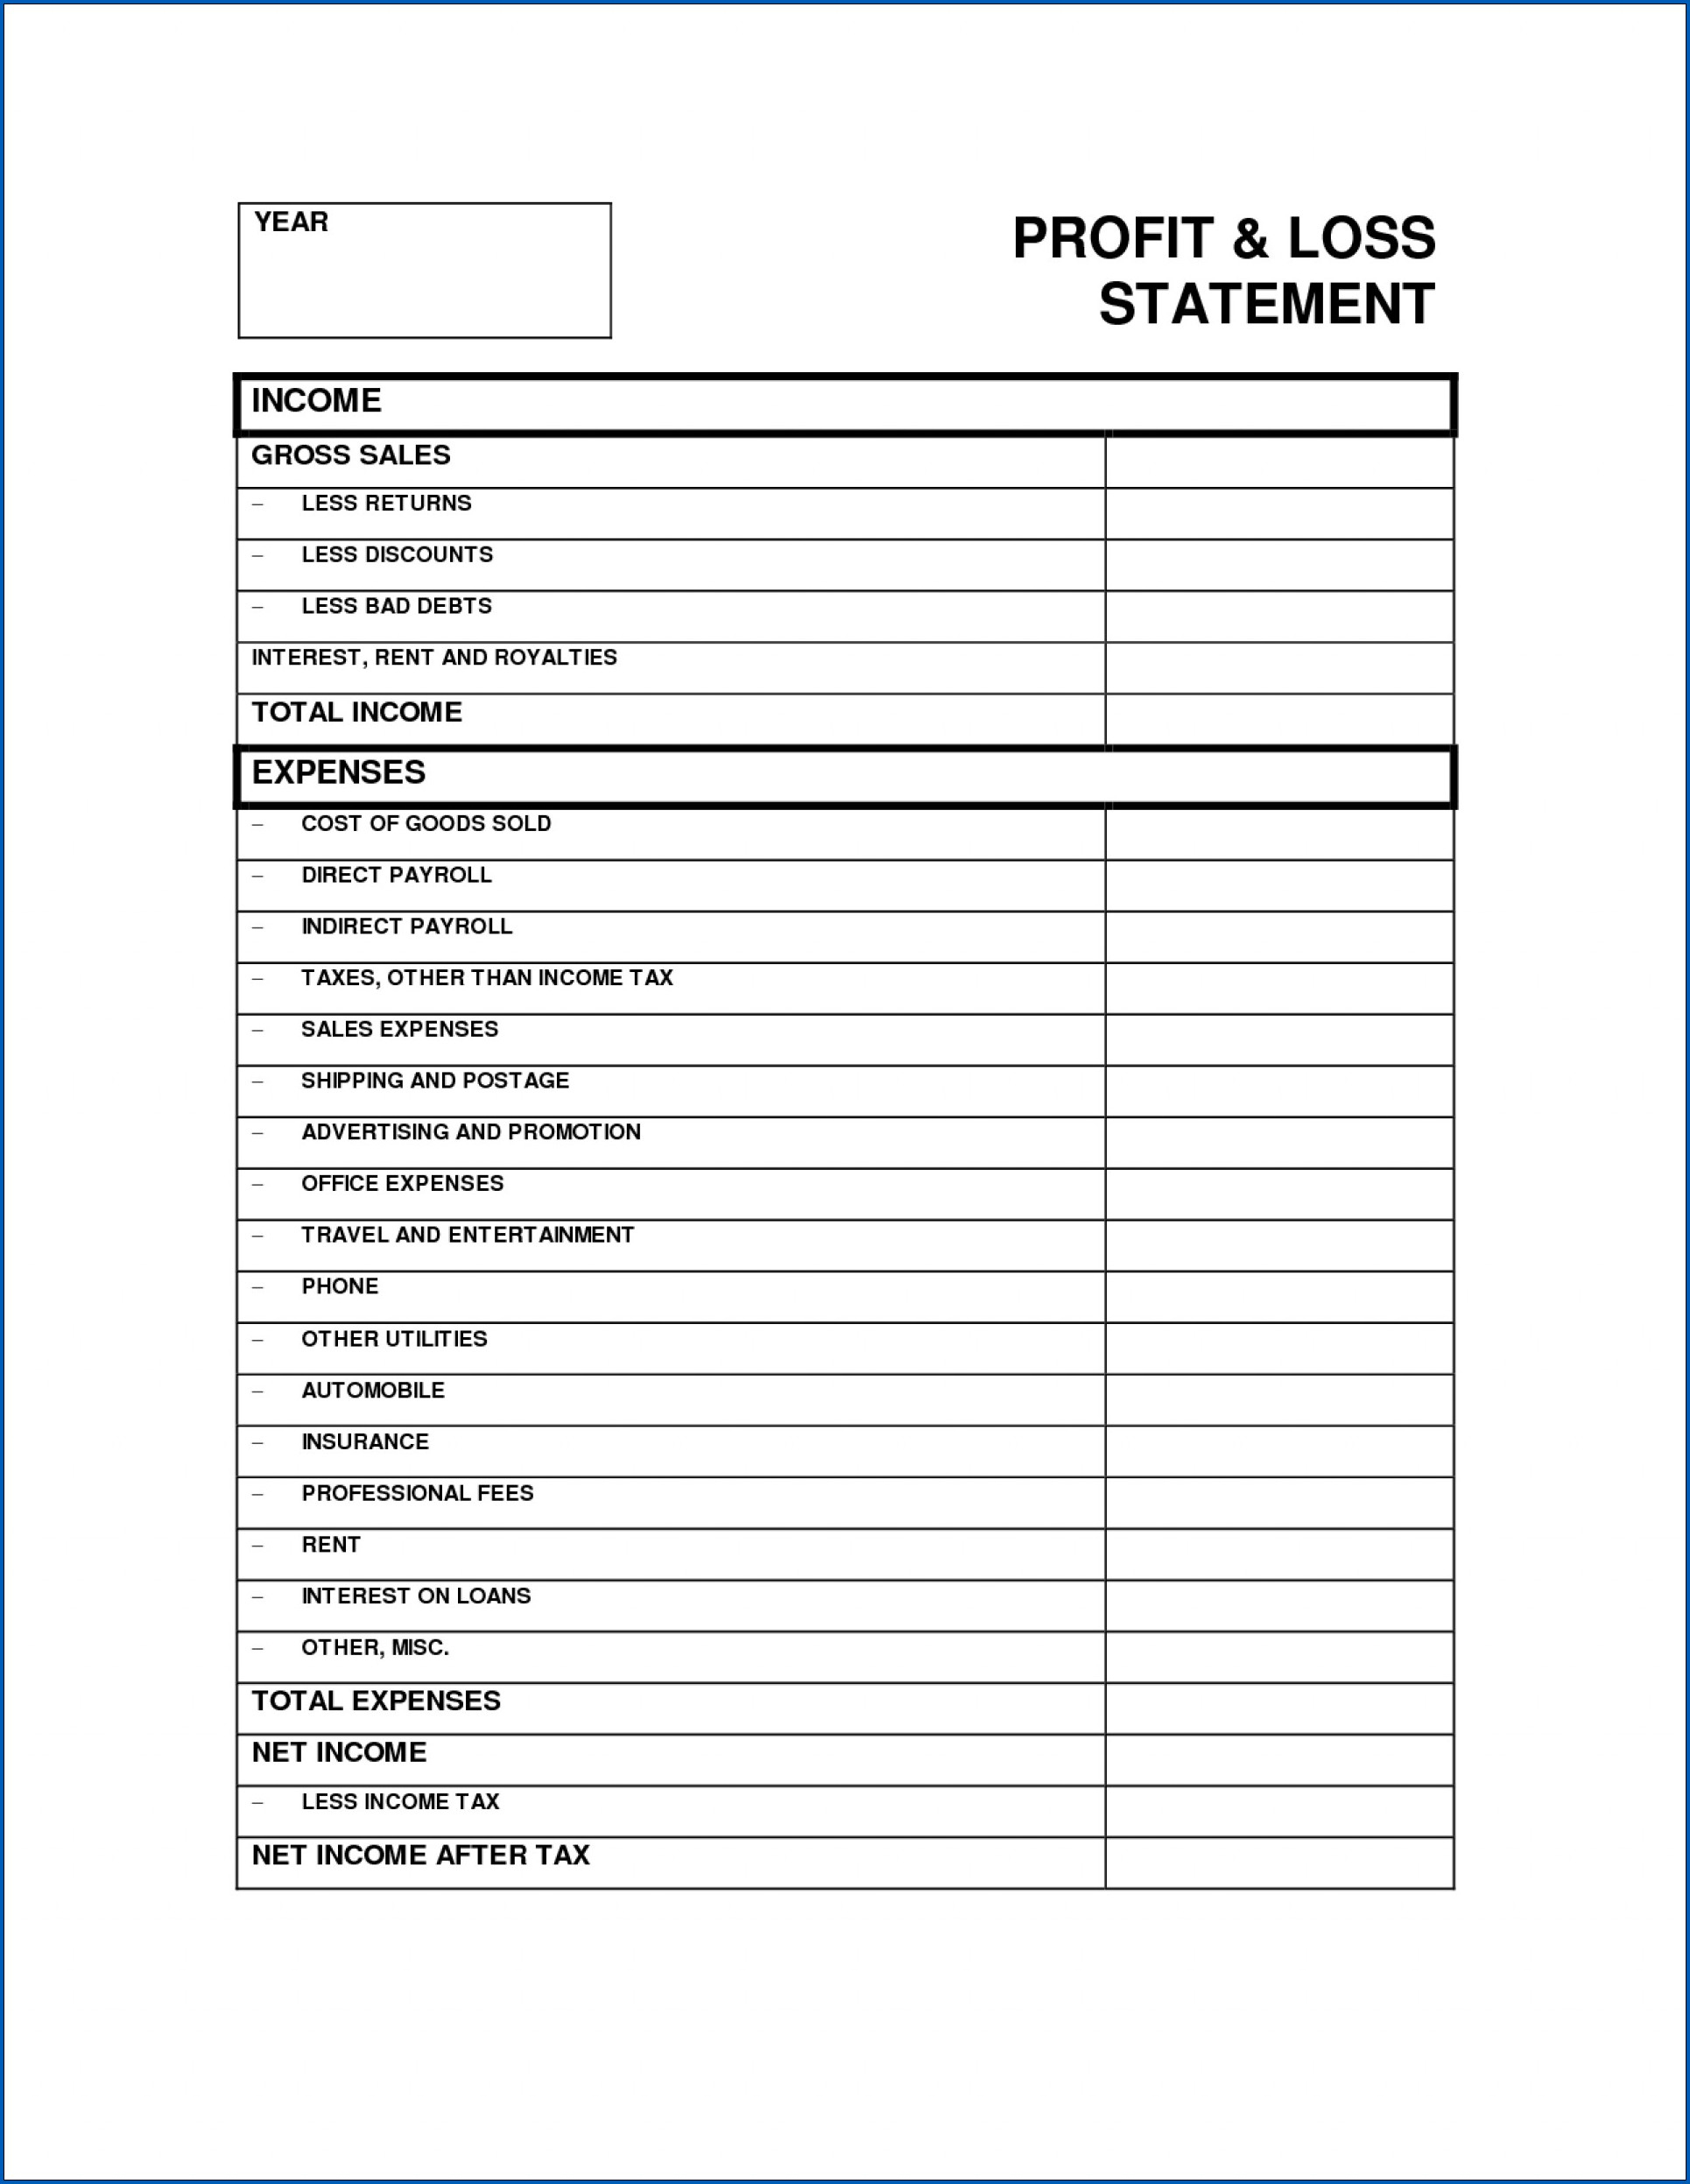 √ Free Profit And Loss Statement Template For Small Business | Templateral regarding Home Business Profit And Loss Statement Template